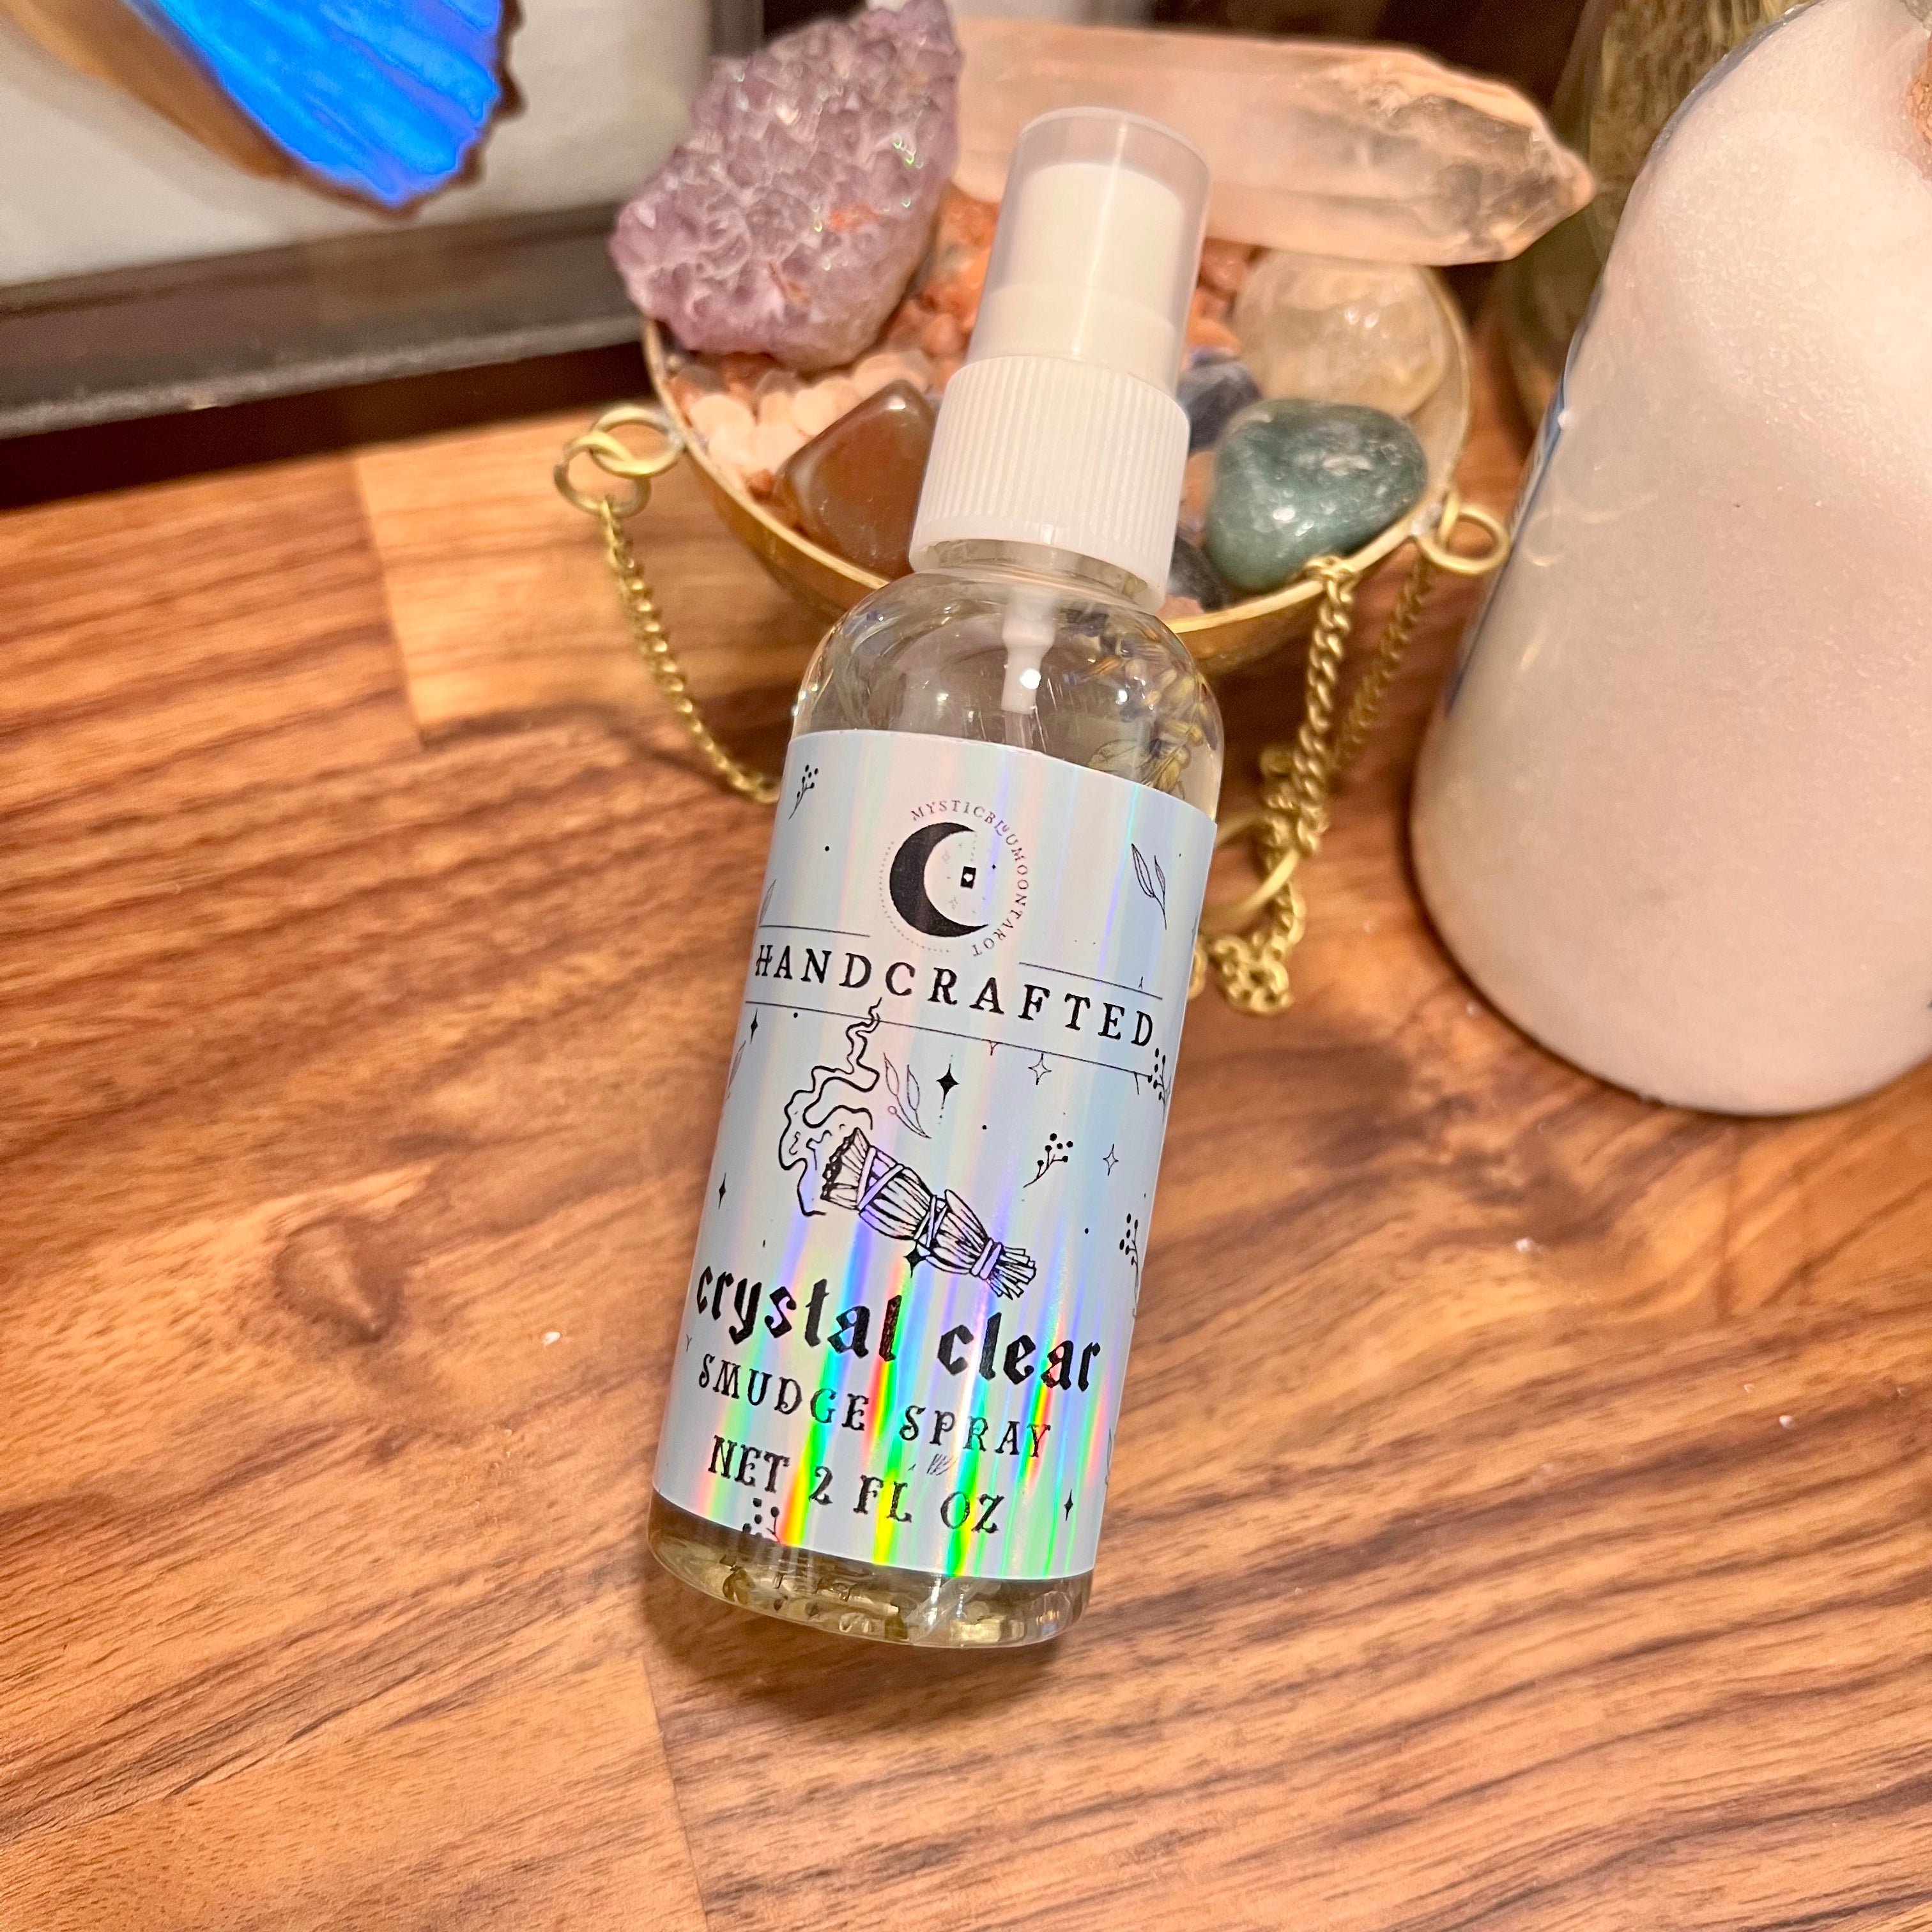 Crystal Clear Cleansing Spray - Smudge Spray Homemade Florida Water